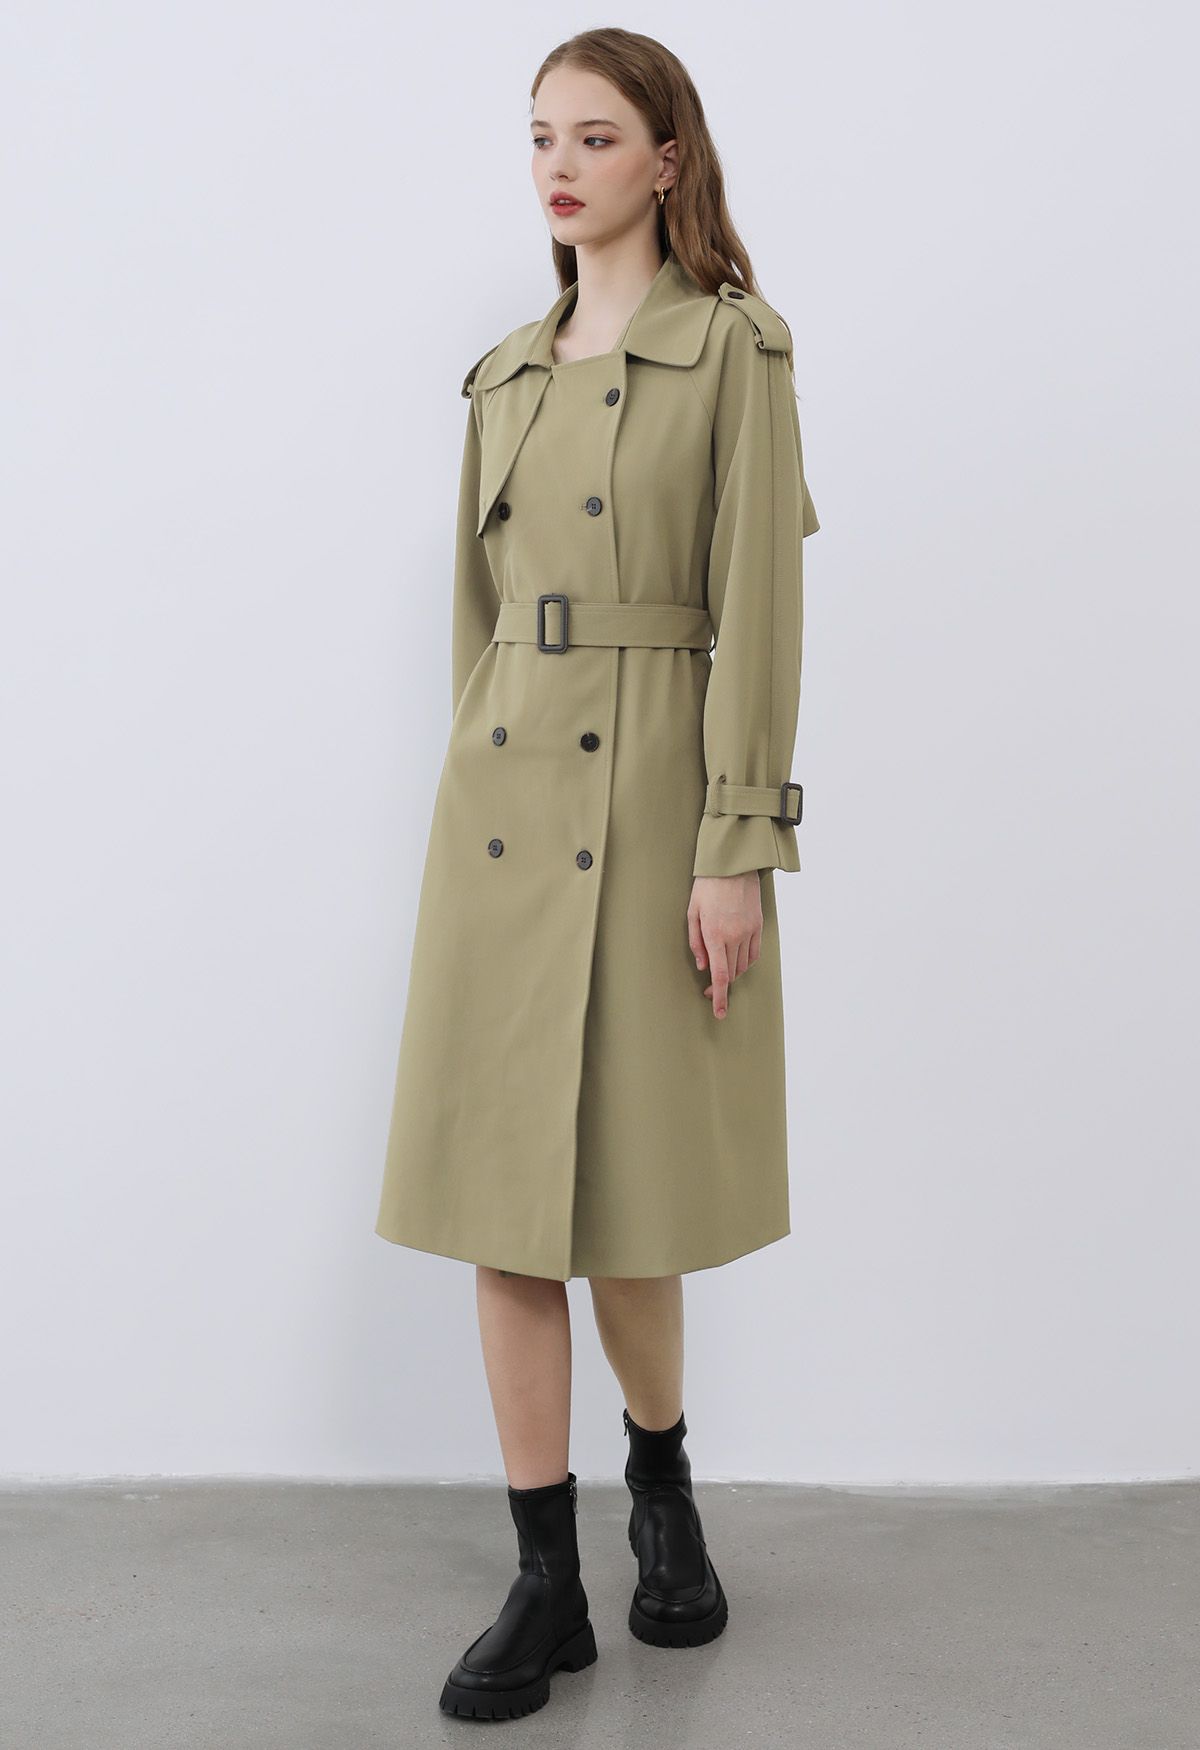 Tailored Double-Breasted Belted Trench Coat in Khaki